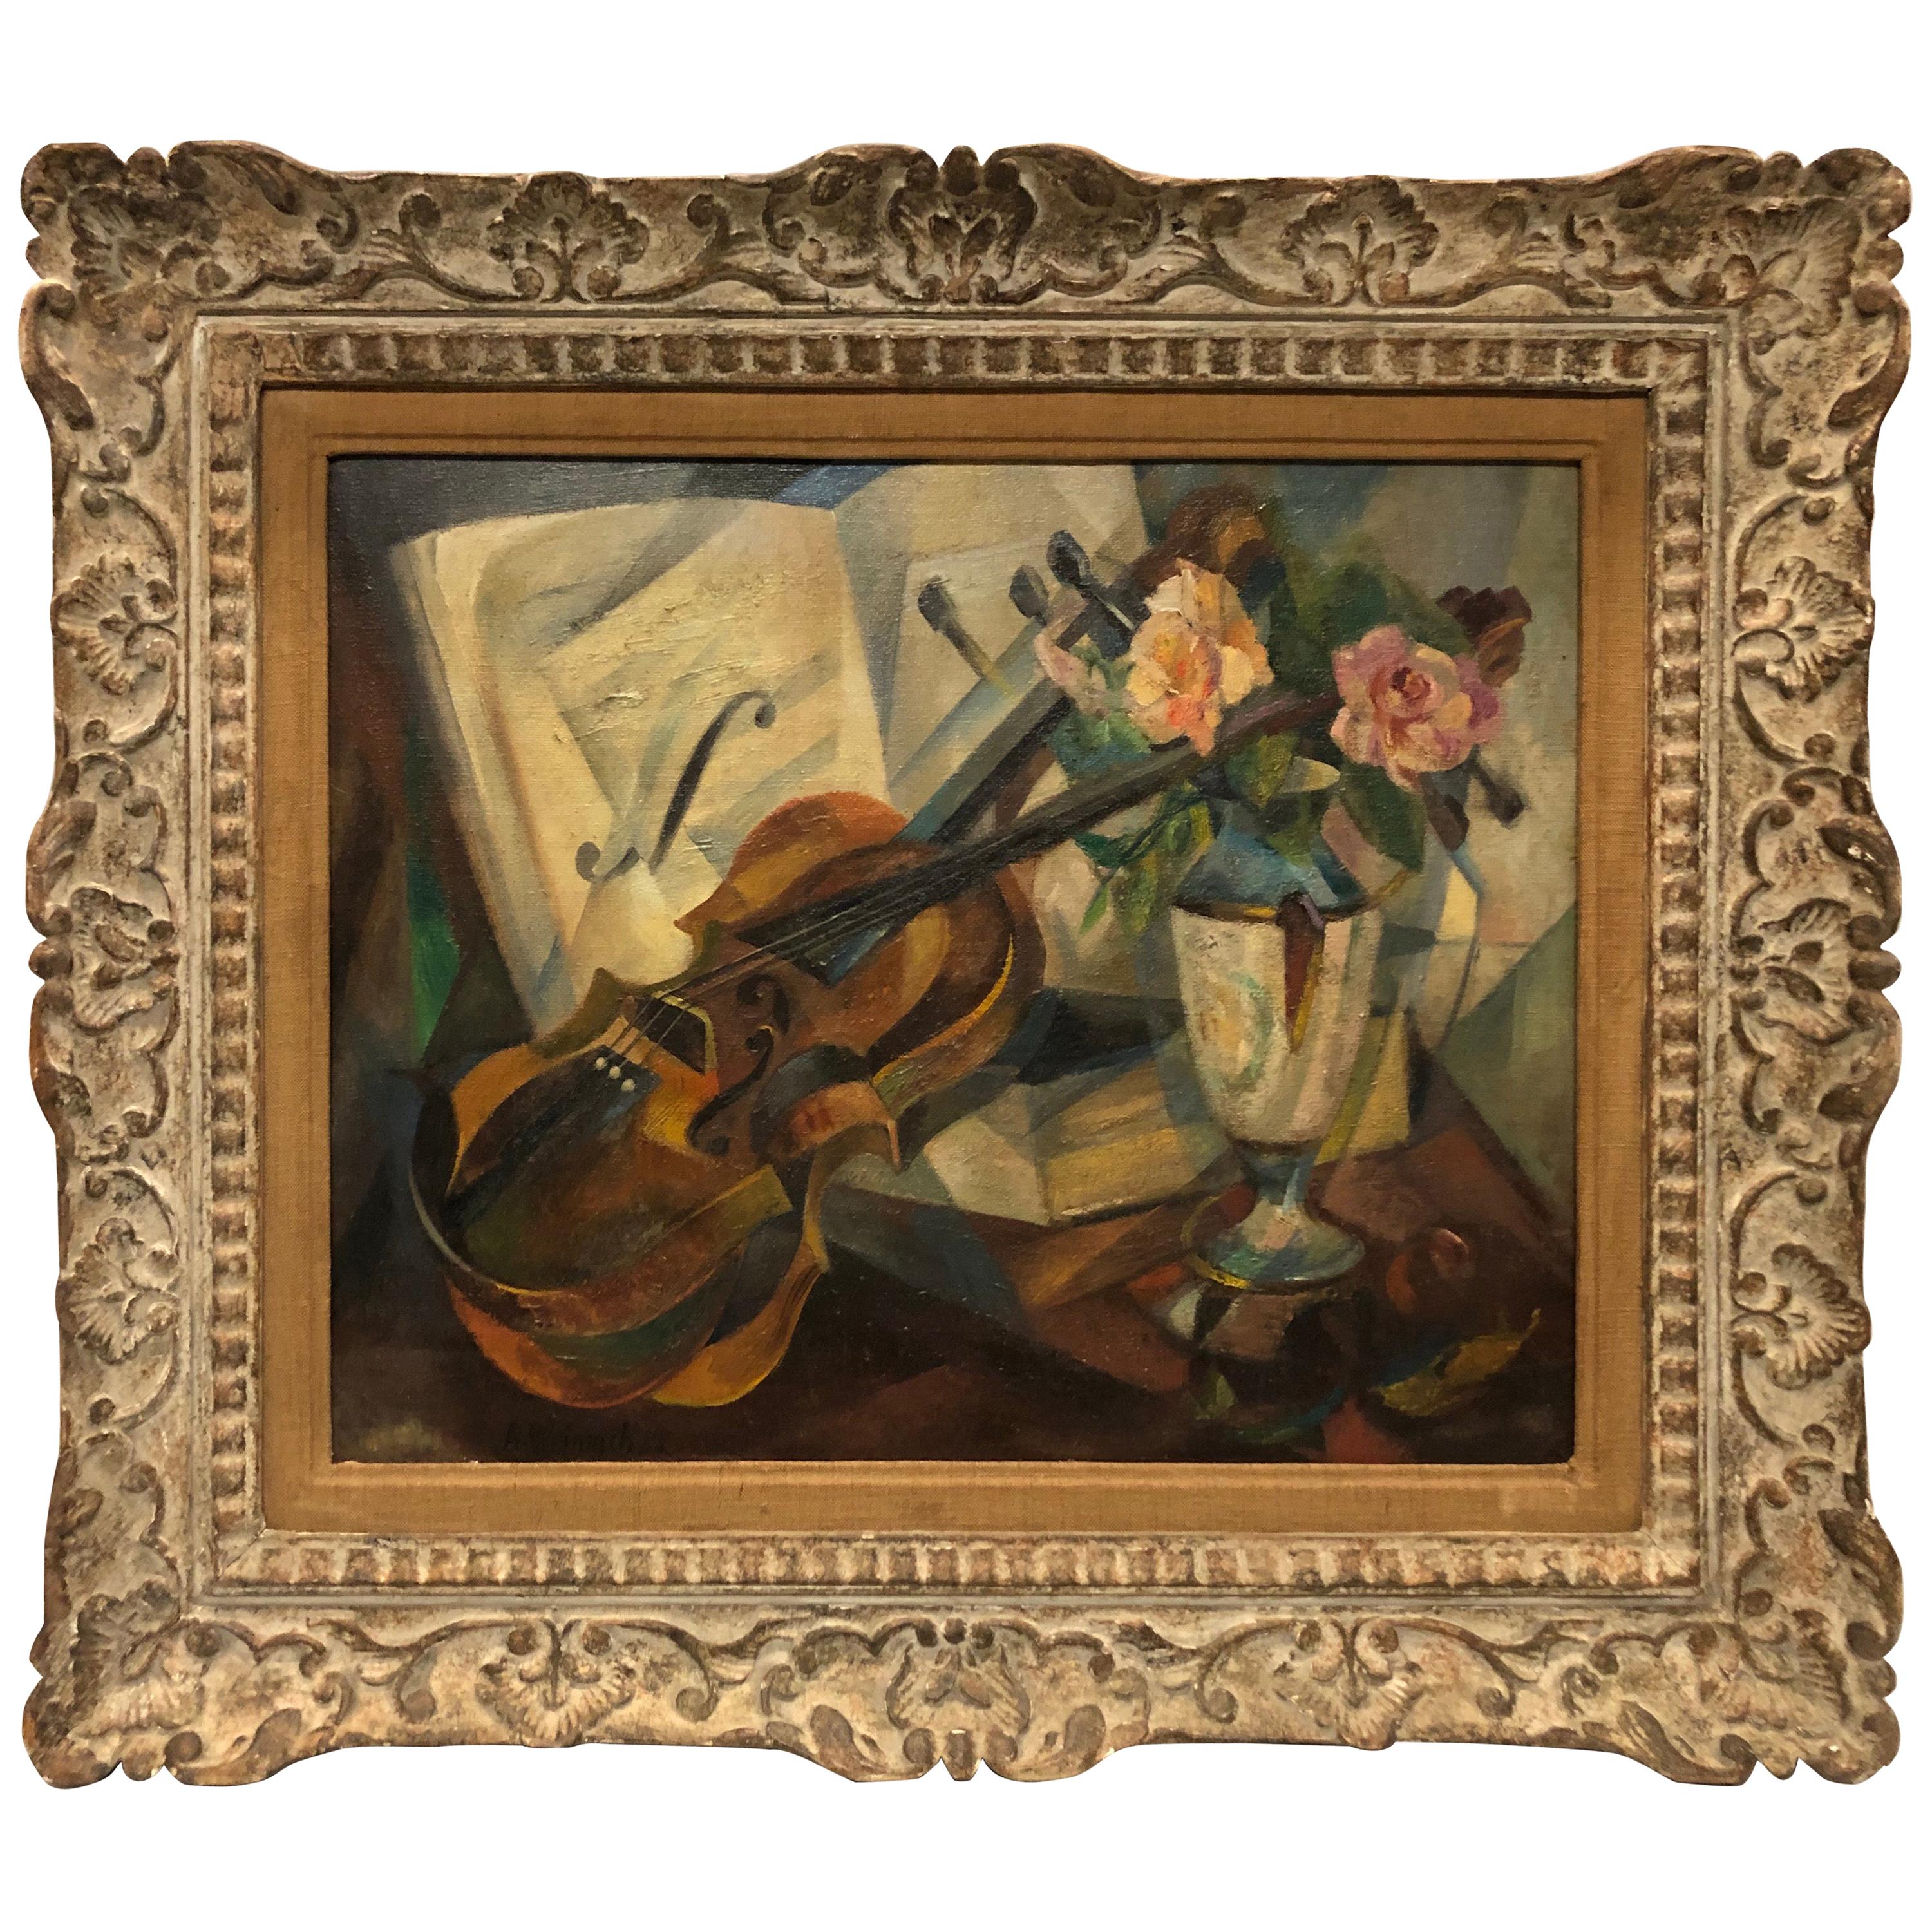 Cubist Still Life "Violin" by Agnes Weinrich, Signed, Dated 1922